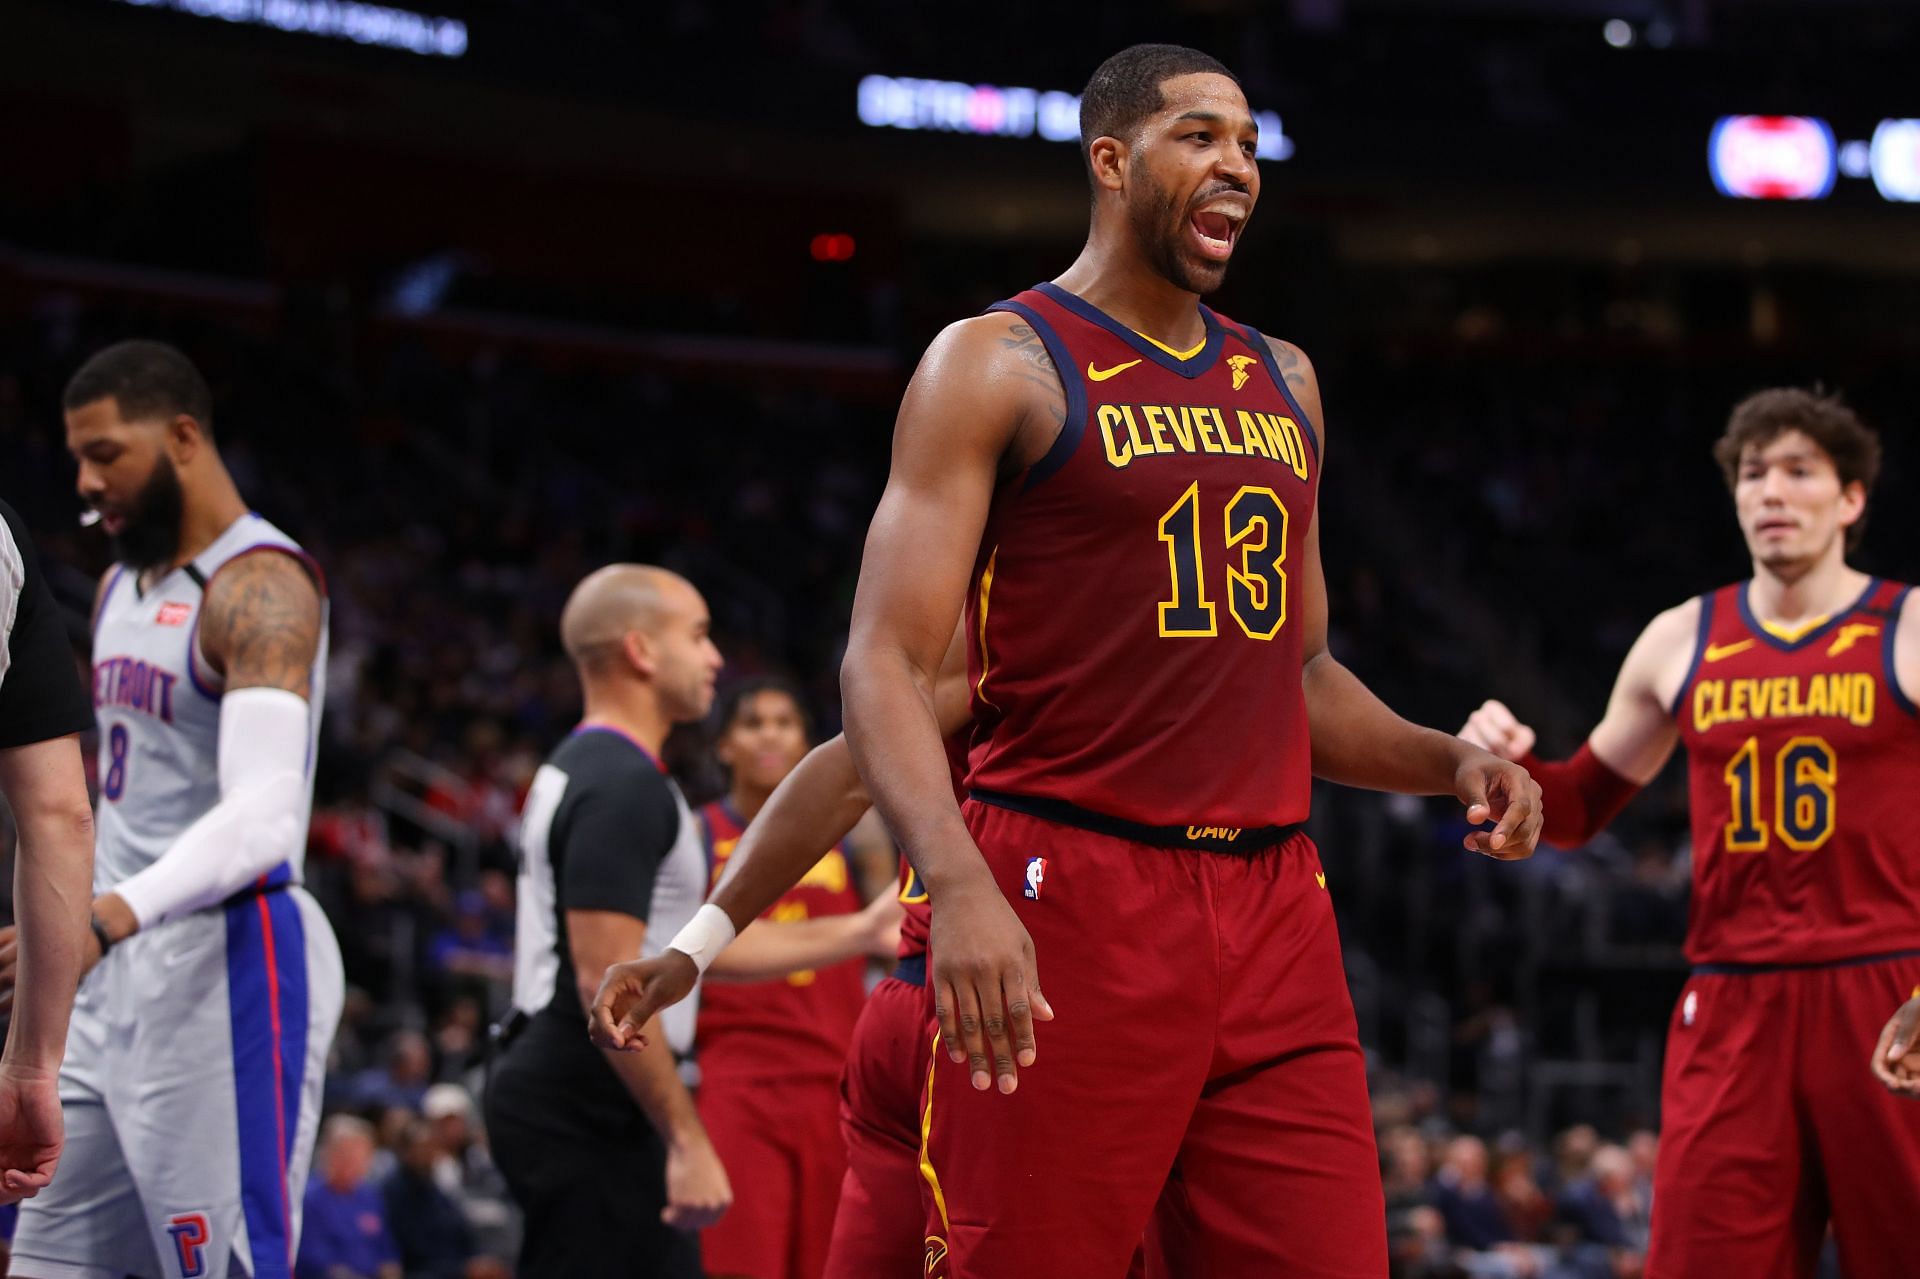 Tristan Thompson has fathered a child with Maralee Nichols